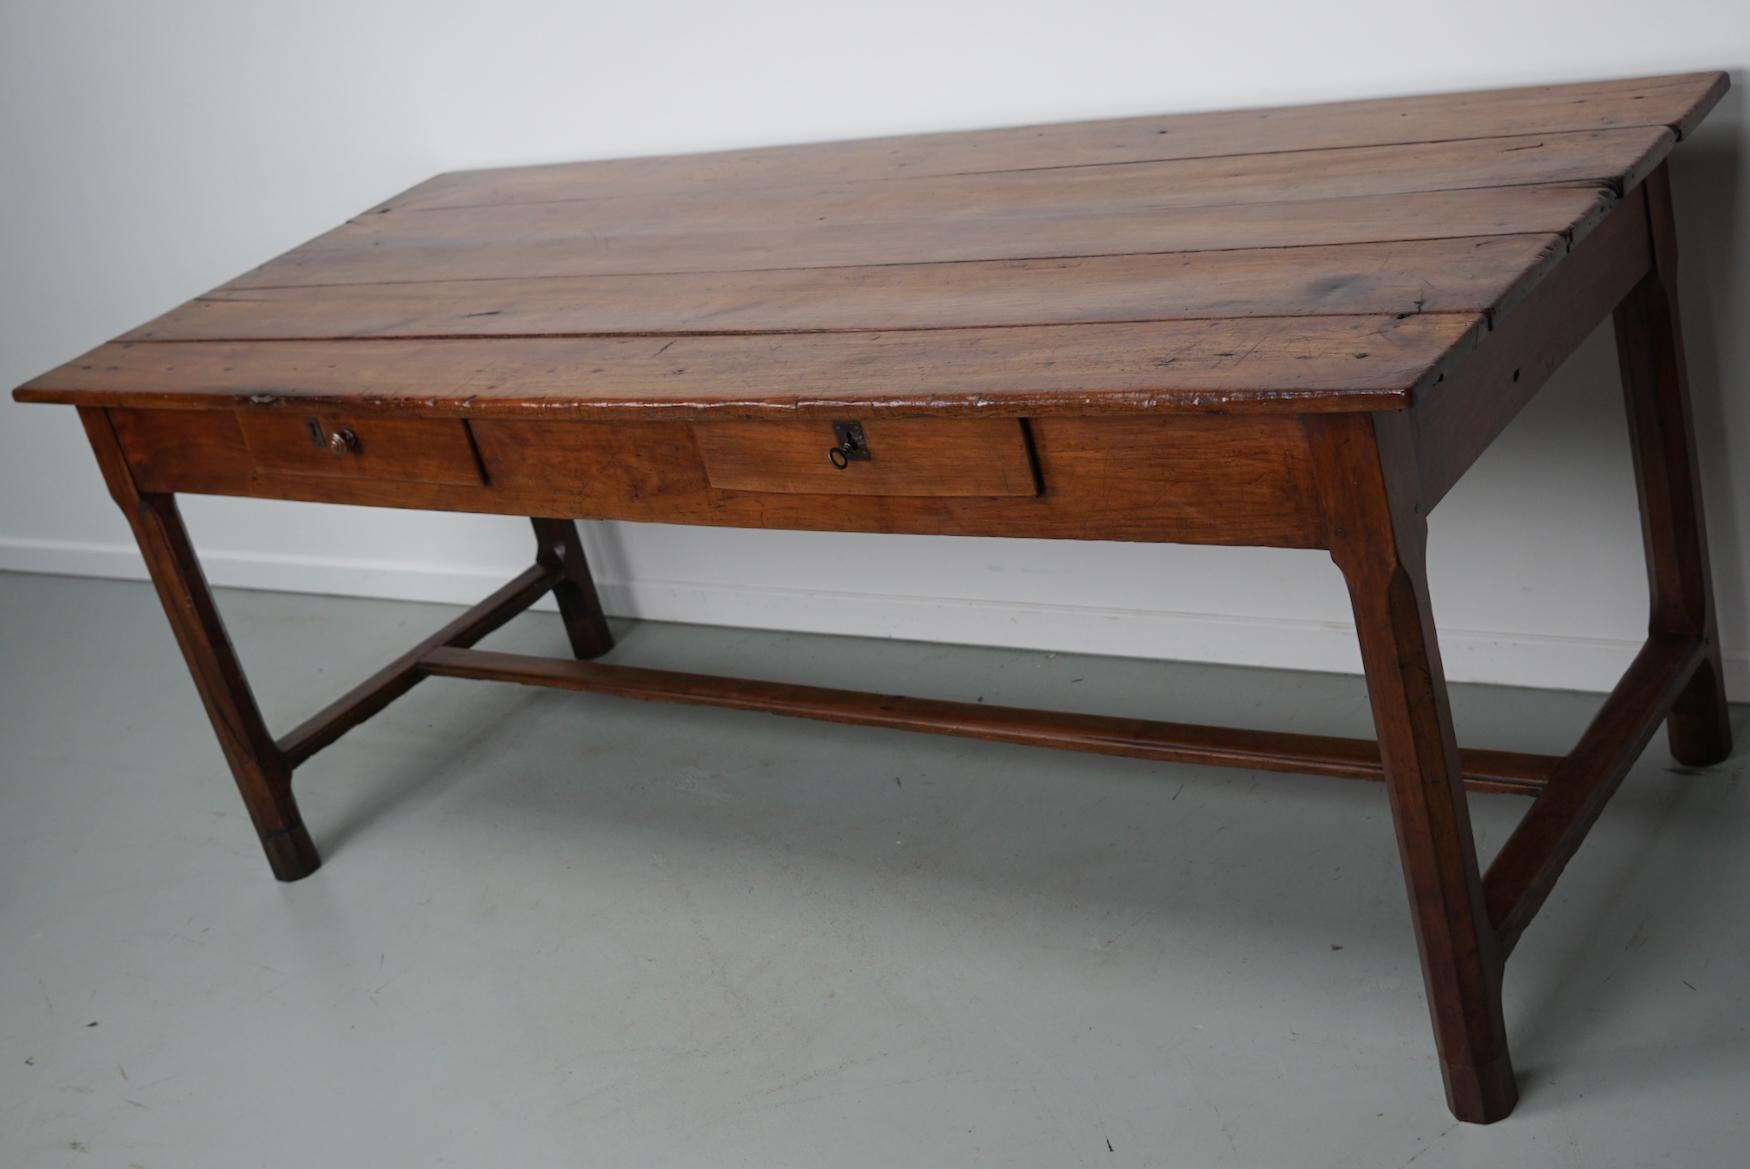 This elegant table was made in Southern France in the mid 19th century. The table was made in solid cherry wood with beautiful grain patterns. It has a very warm color and the table shows many marks of use, old repairs and a has a great patina. The